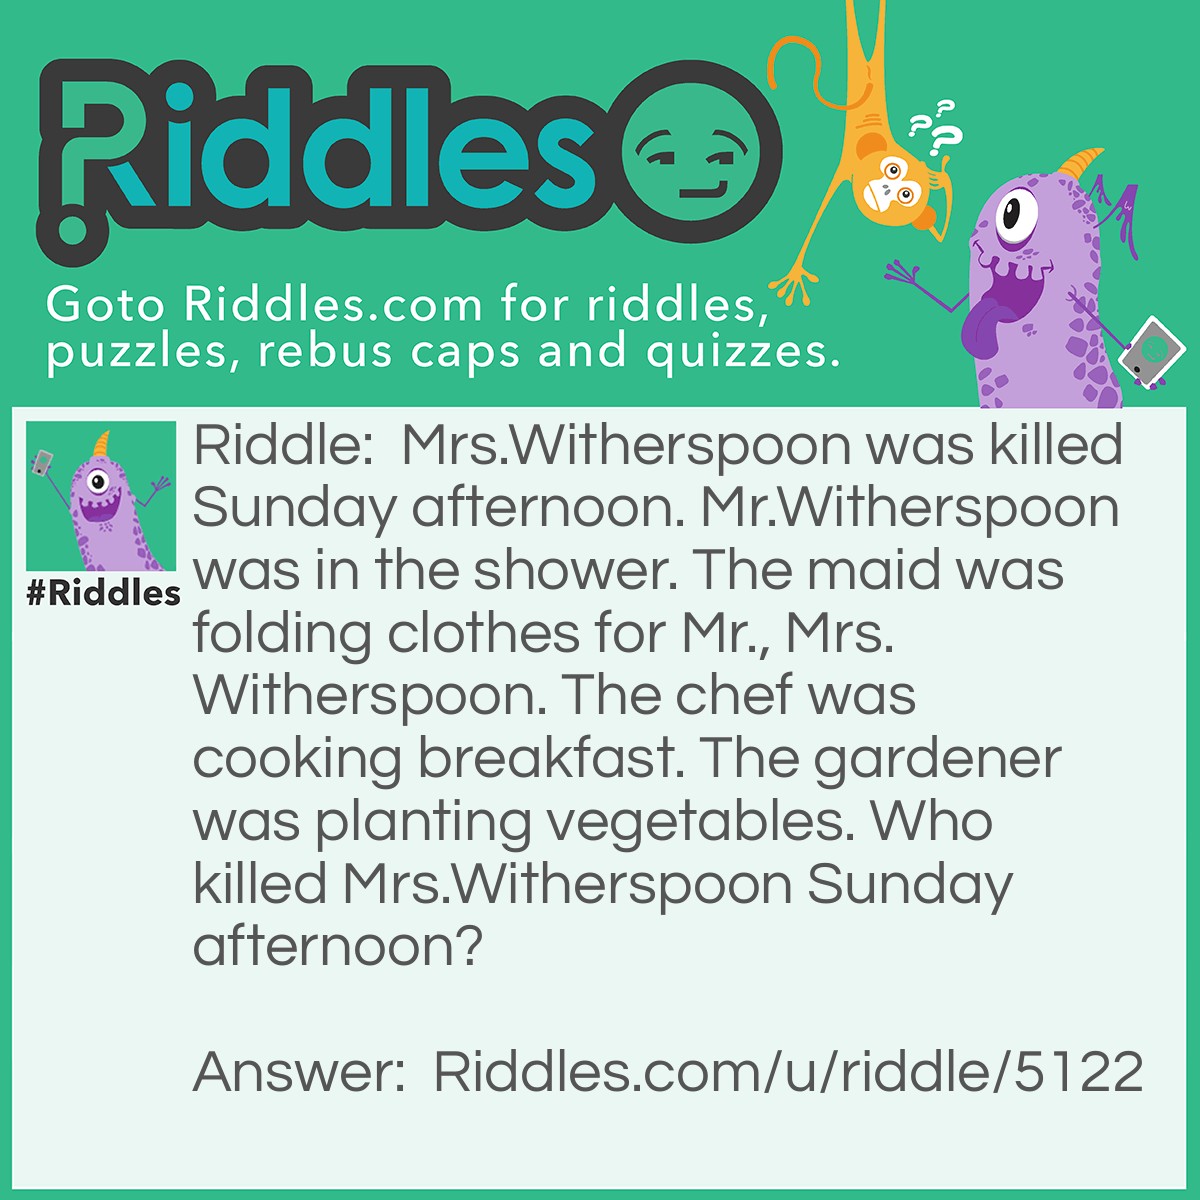 Riddle: Mrs.Witherspoon was killed Sunday afternoon. Mr.Witherspoon was in the shower. The maid was folding clothes for Mr., Mrs.Witherspoon. The chef was cooking breakfast. The gardener was planting vegetables. Who killed Mrs.Witherspoon Sunday afternoon? Answer: The chef. The chef was making breakfast in the afternoon. Thats when Mrs.Witherspoon died that, afternoon.